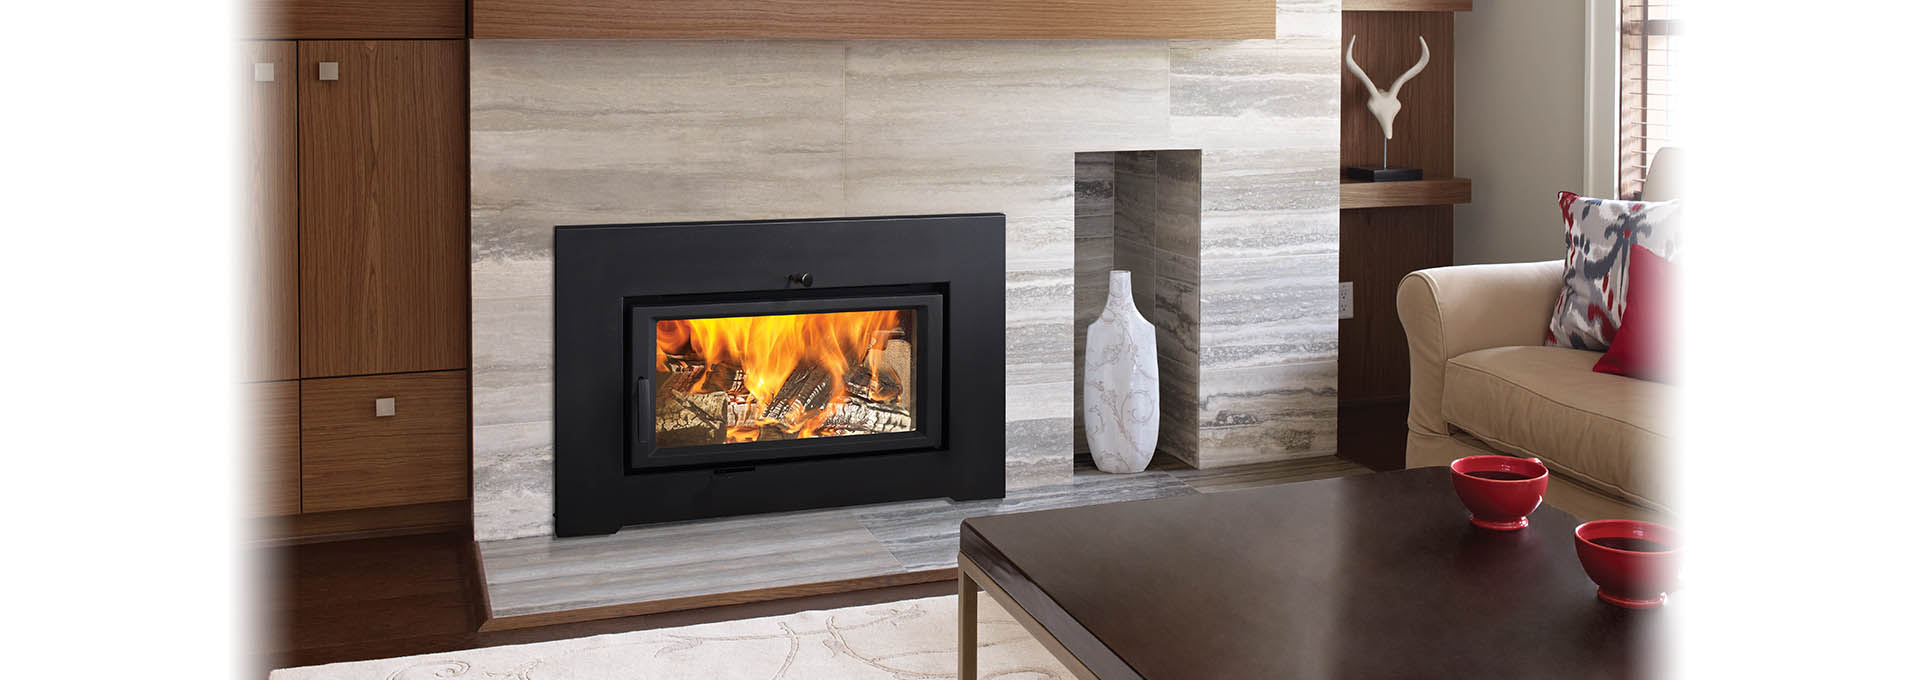 Regency CI2700 Wood Insert with white and grey tile surround and wood mantle